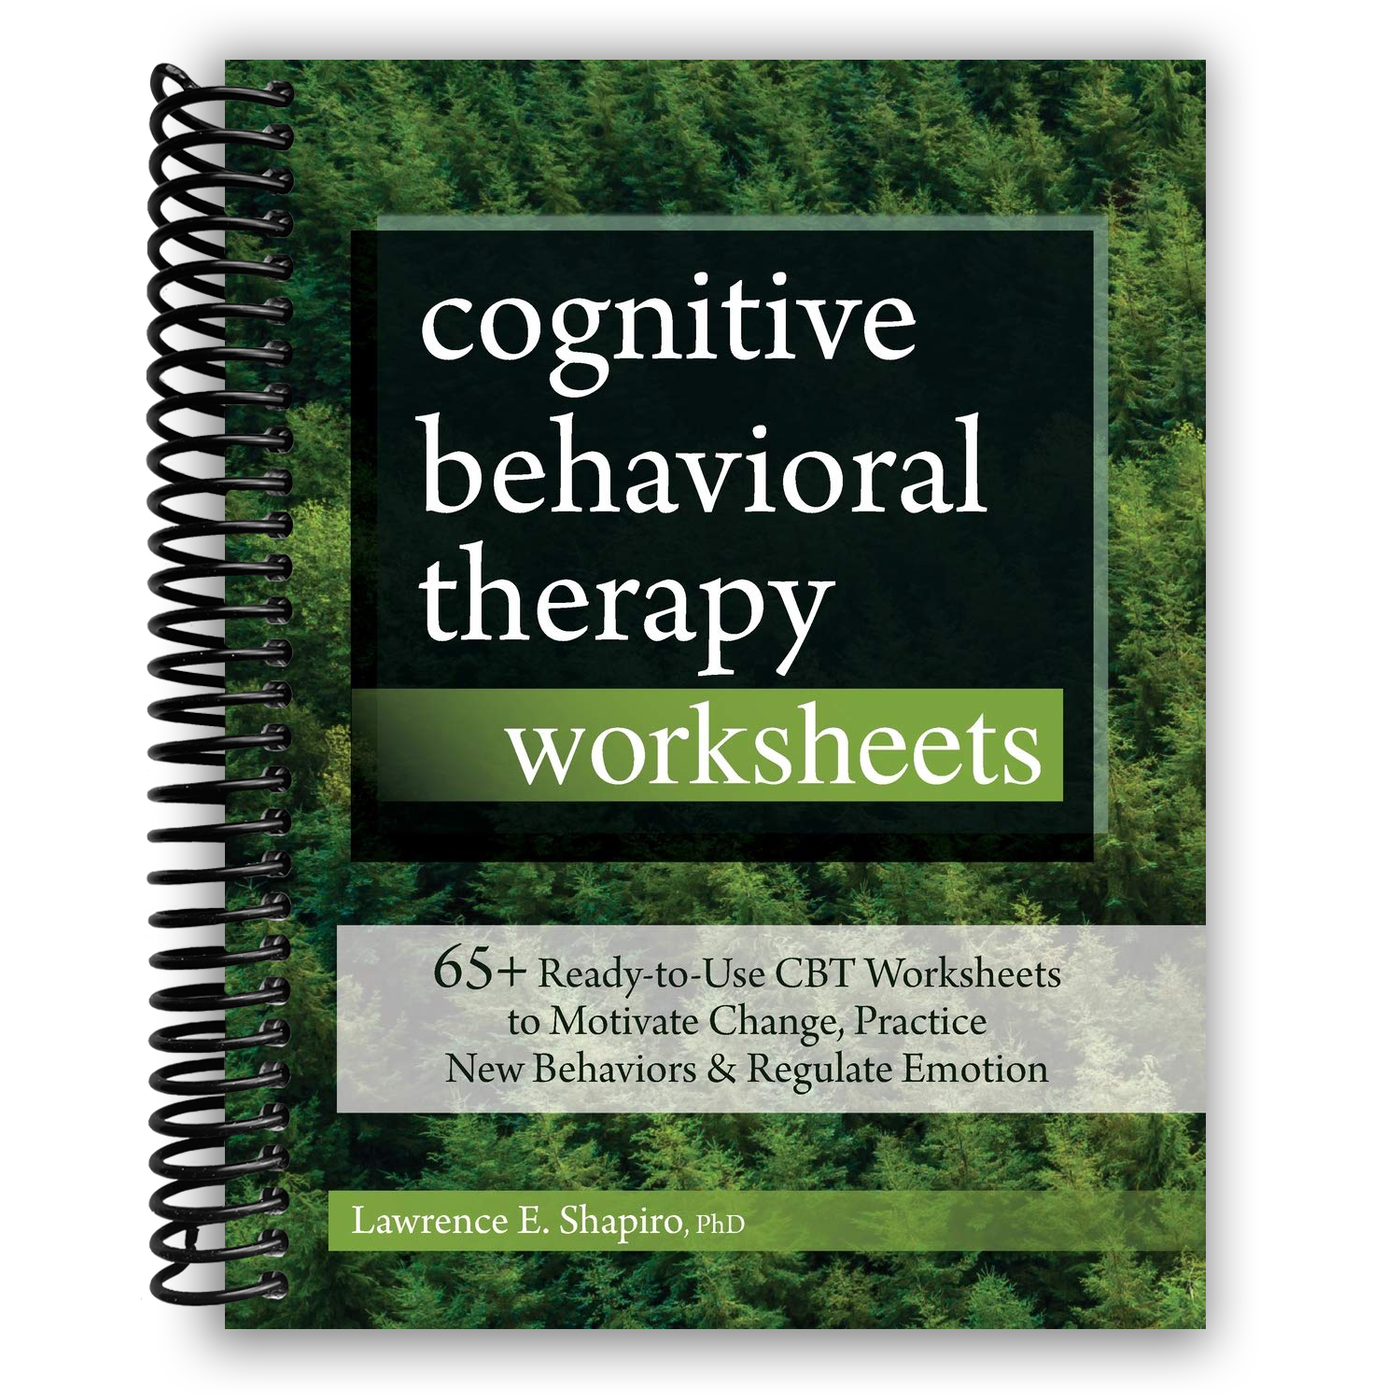 Cognitive Behavioral Therapy Worksheets: 65+ Ready-to-Use CBT Worksheets to Motivate Change, Practice New Behaviors & Regulate Emotion(Spiral Bound)